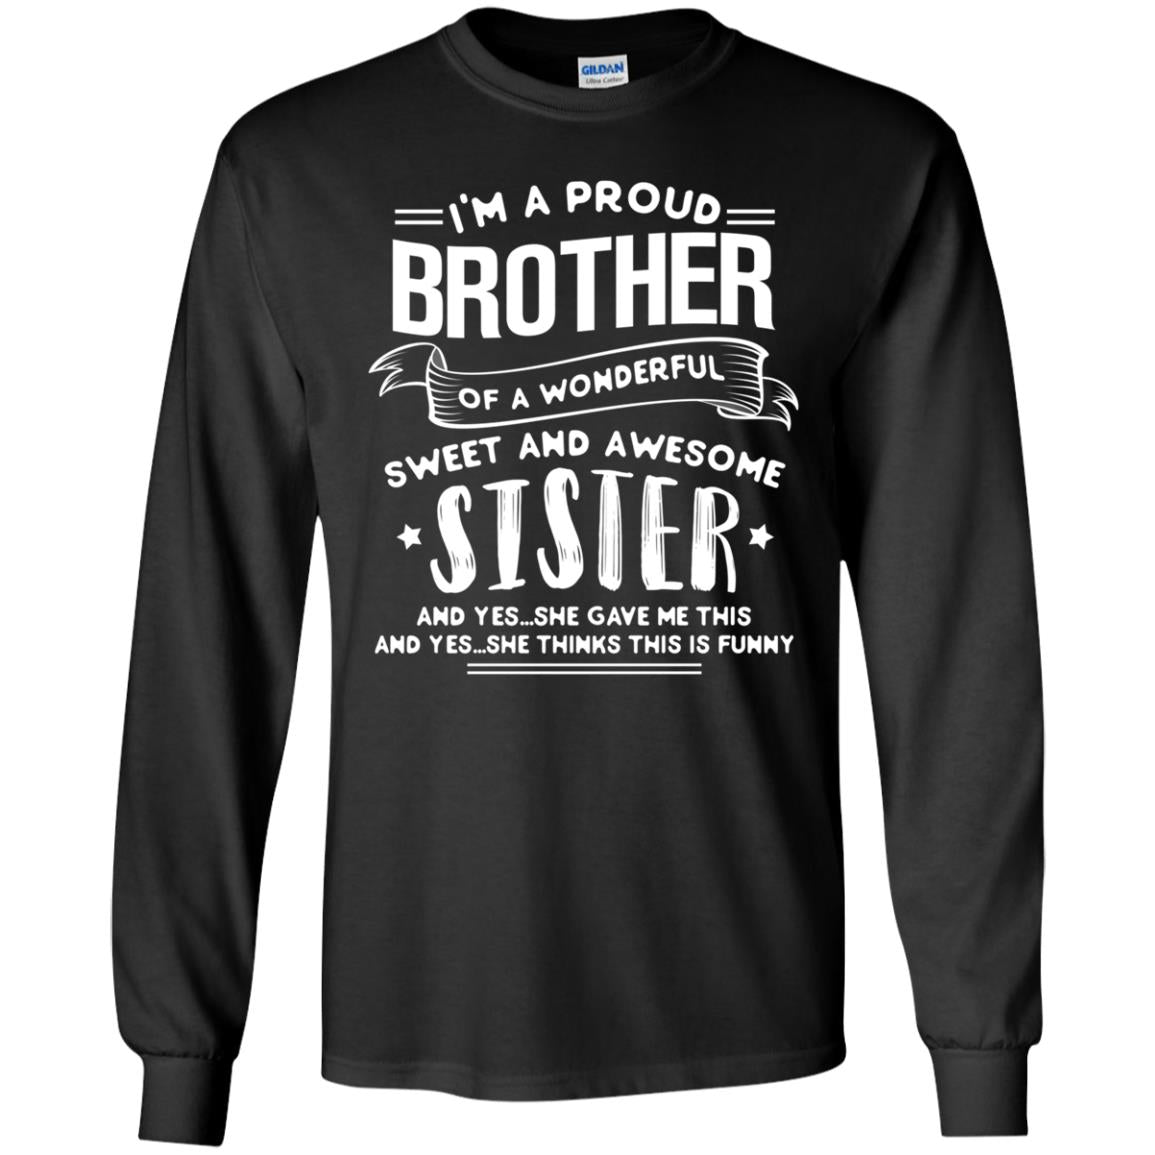 I_m A Proud Brother Of A Wonderful, Sweet And Awesome Sister Family ShirtG240 Gildan LS Ultra Cotton T-Shirt